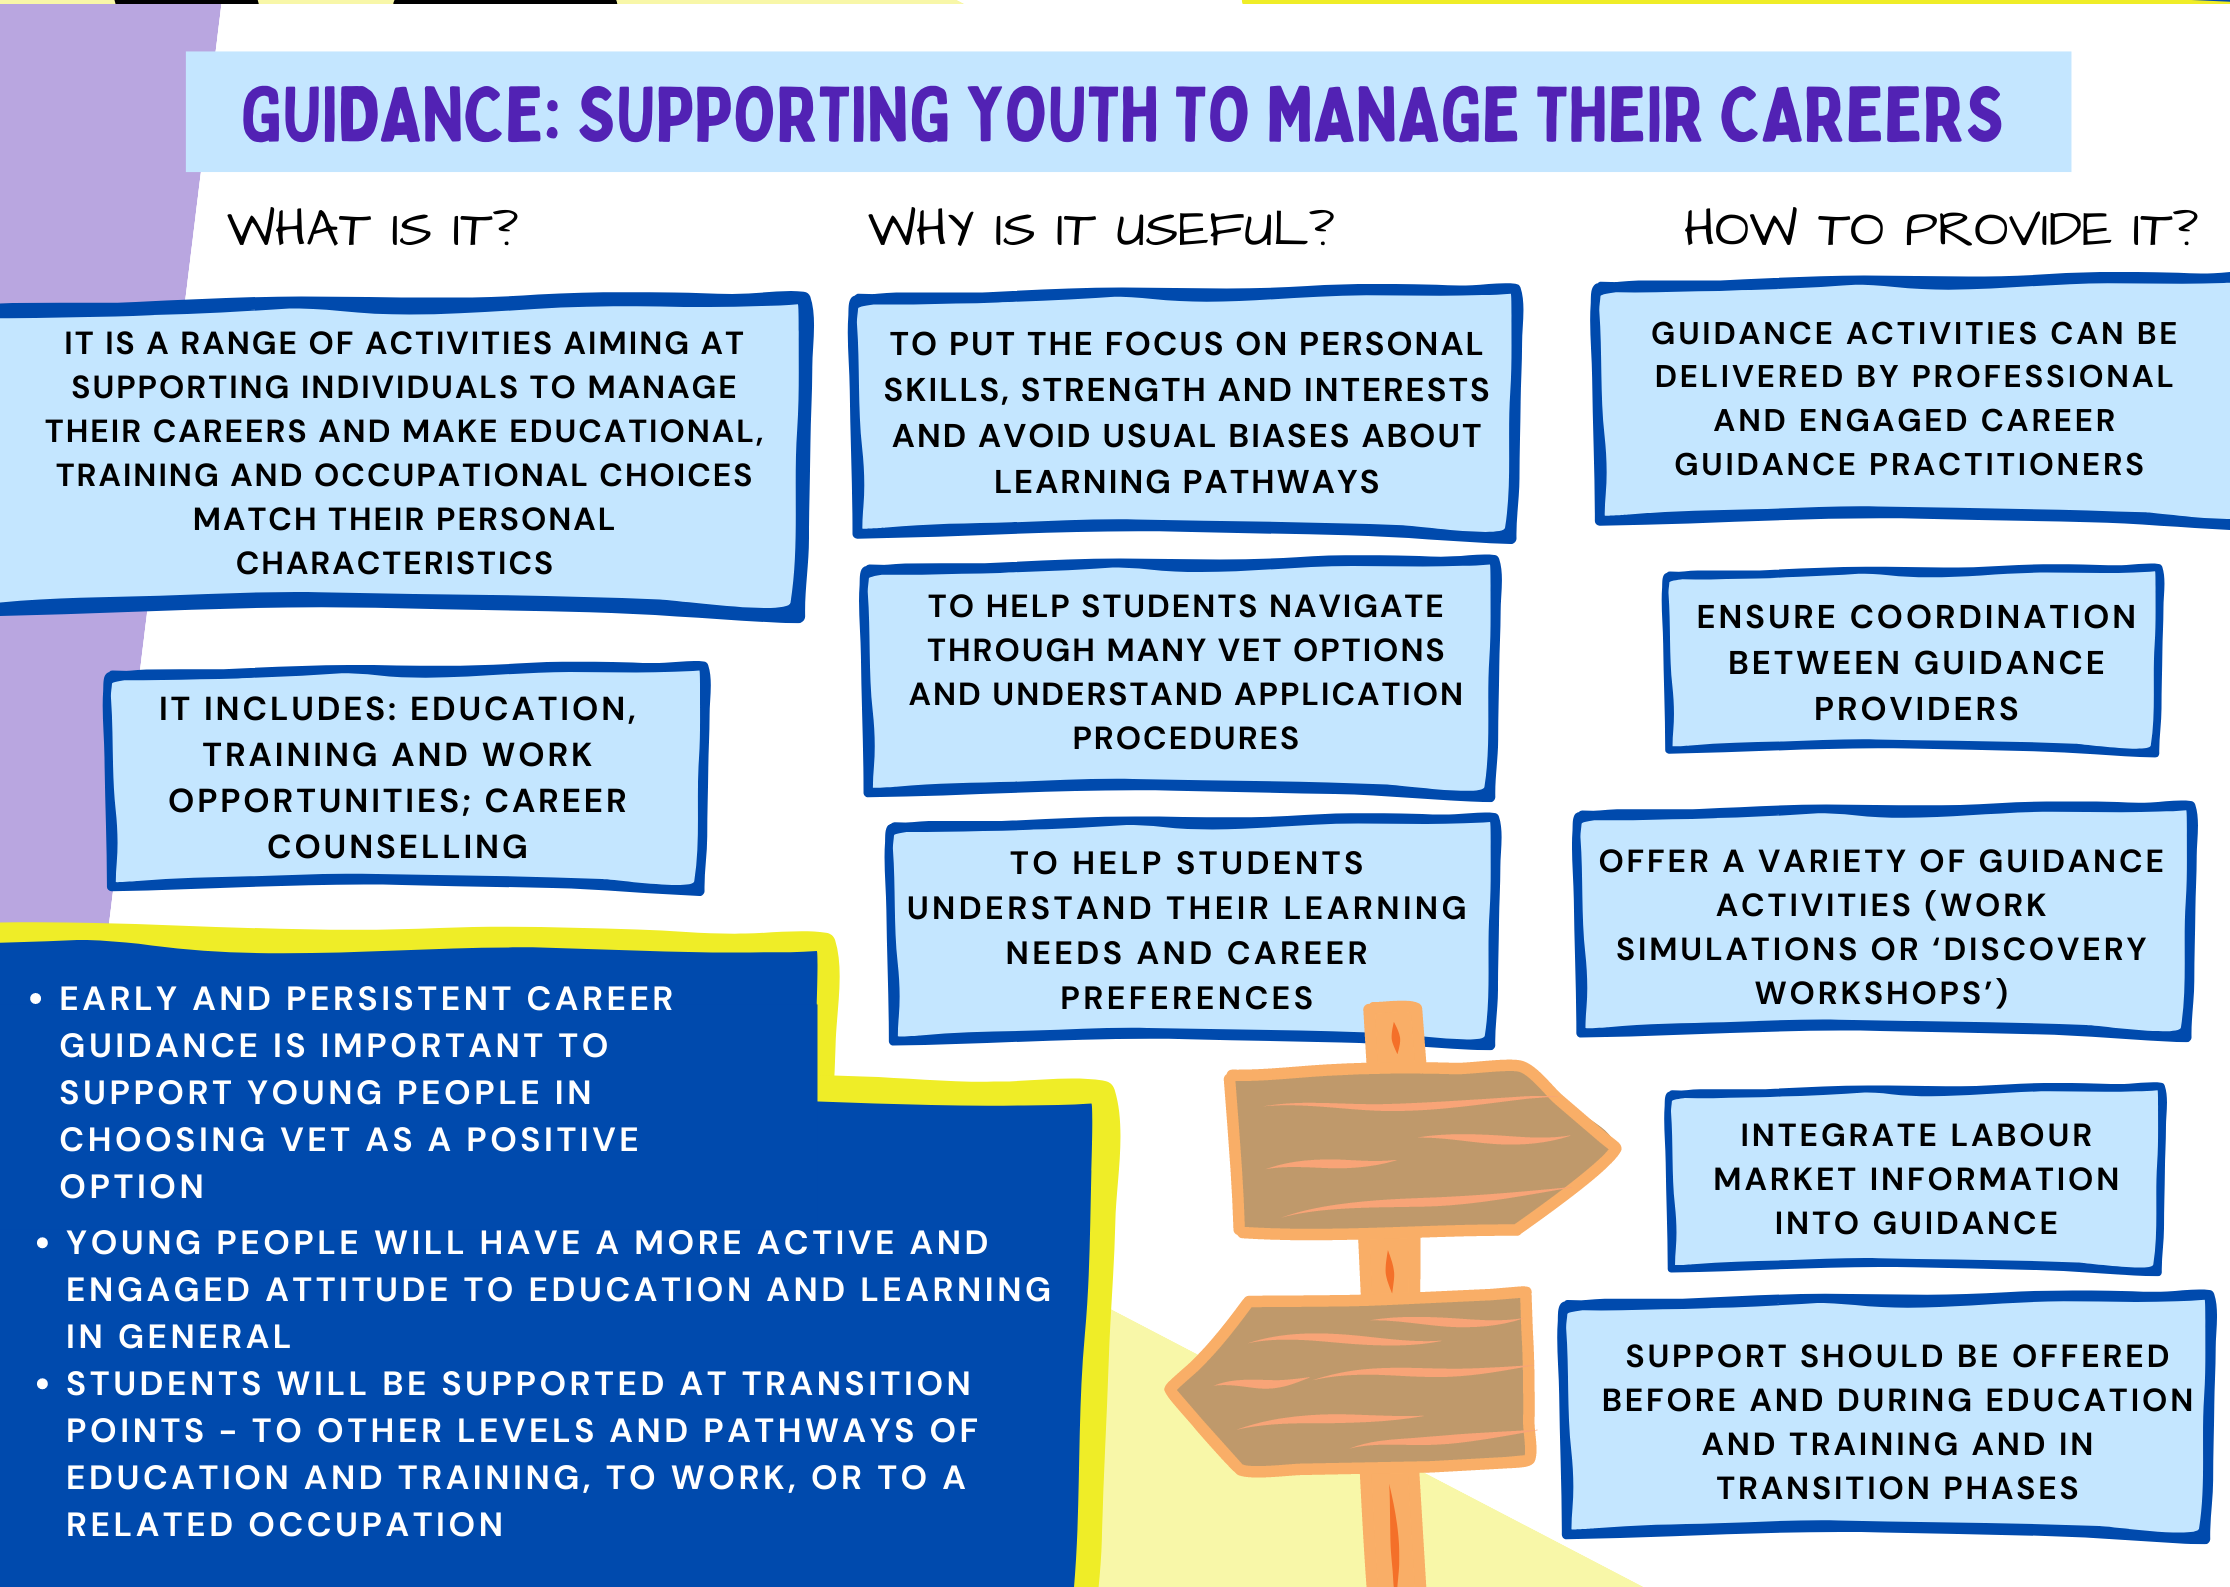 08_guidance-supporting youth to manage their careers